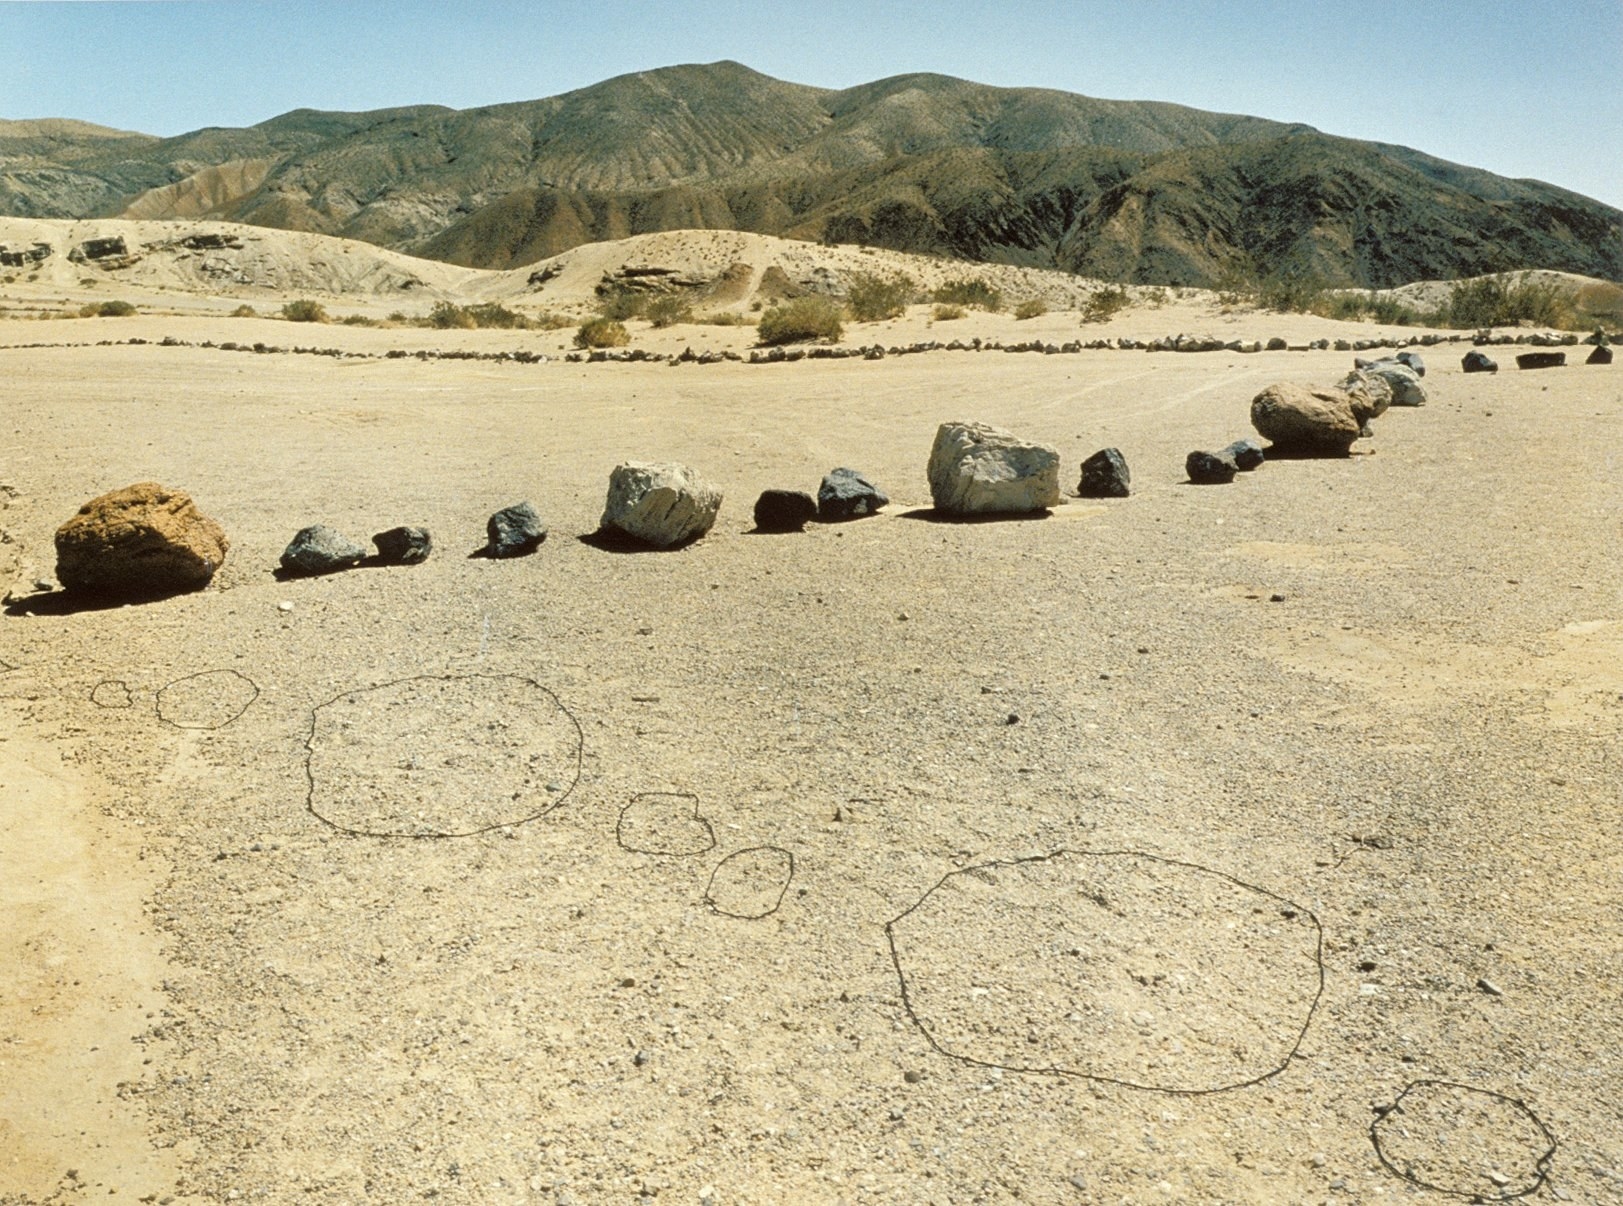 A line of boulders is seen next to a line of outlined boulders